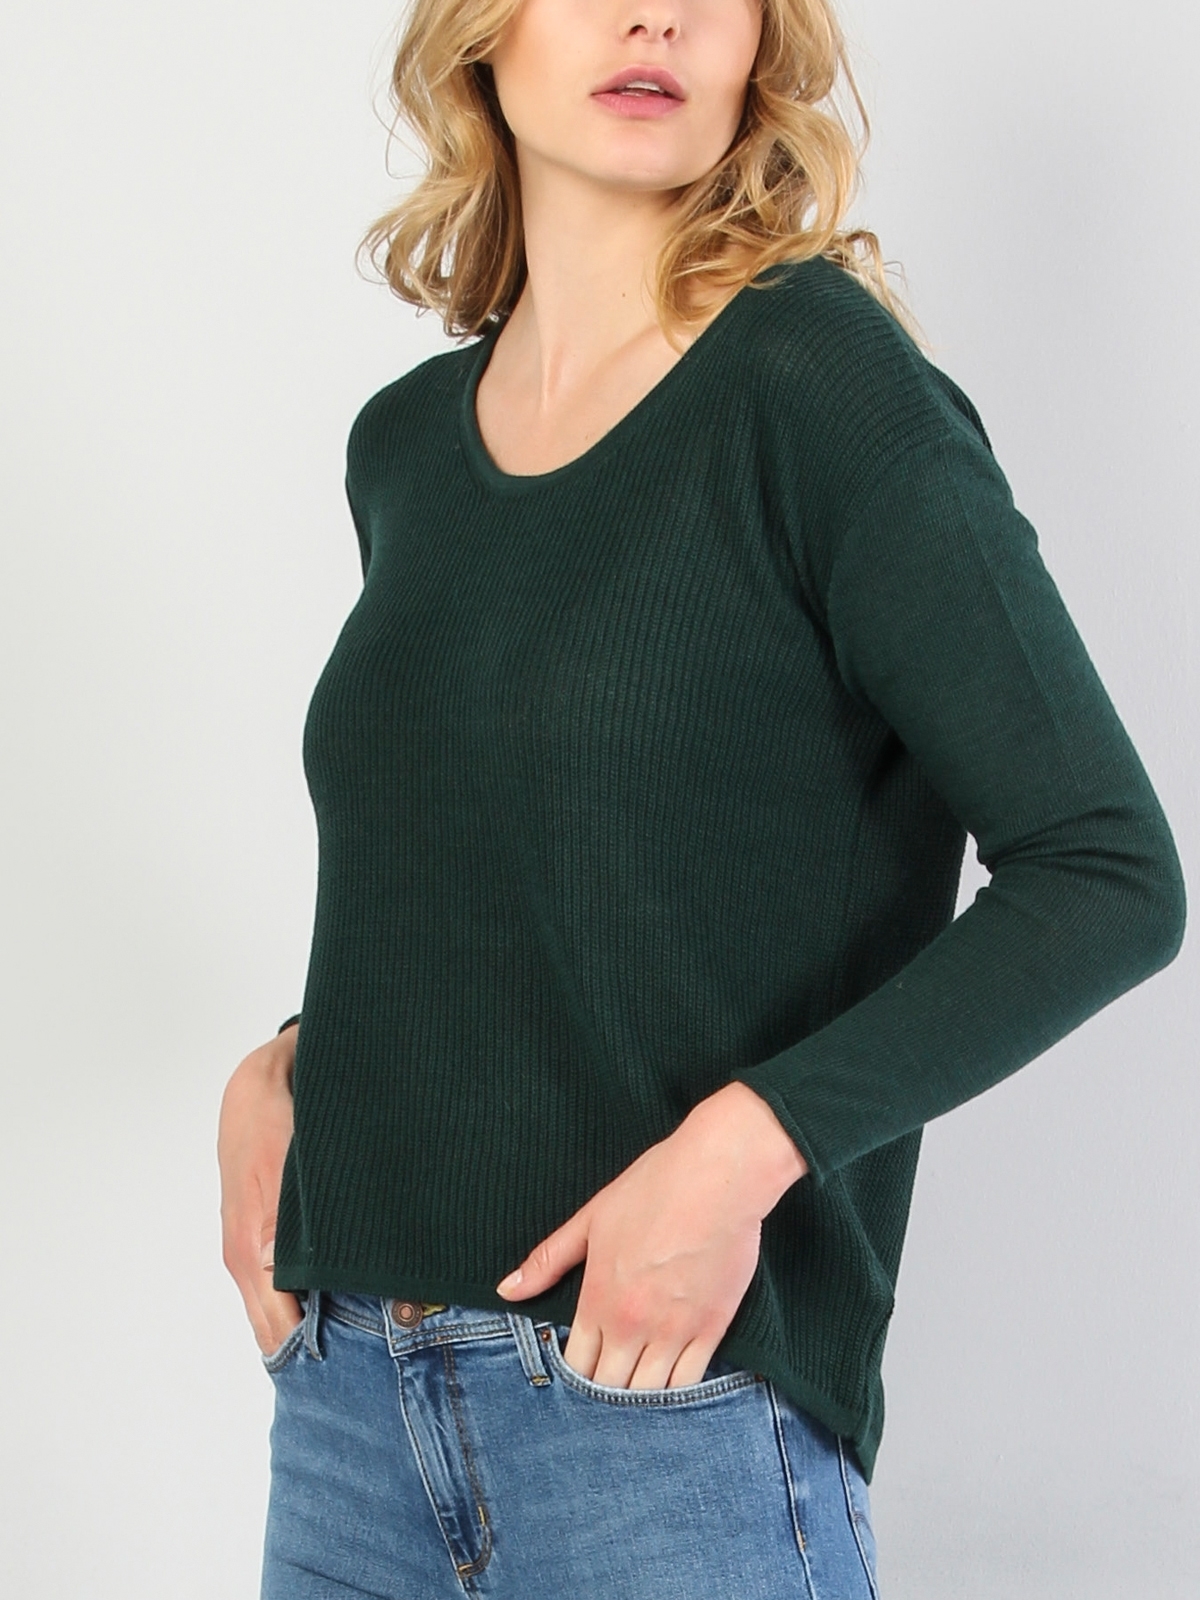 Colins Green Woman Sweaters. 1